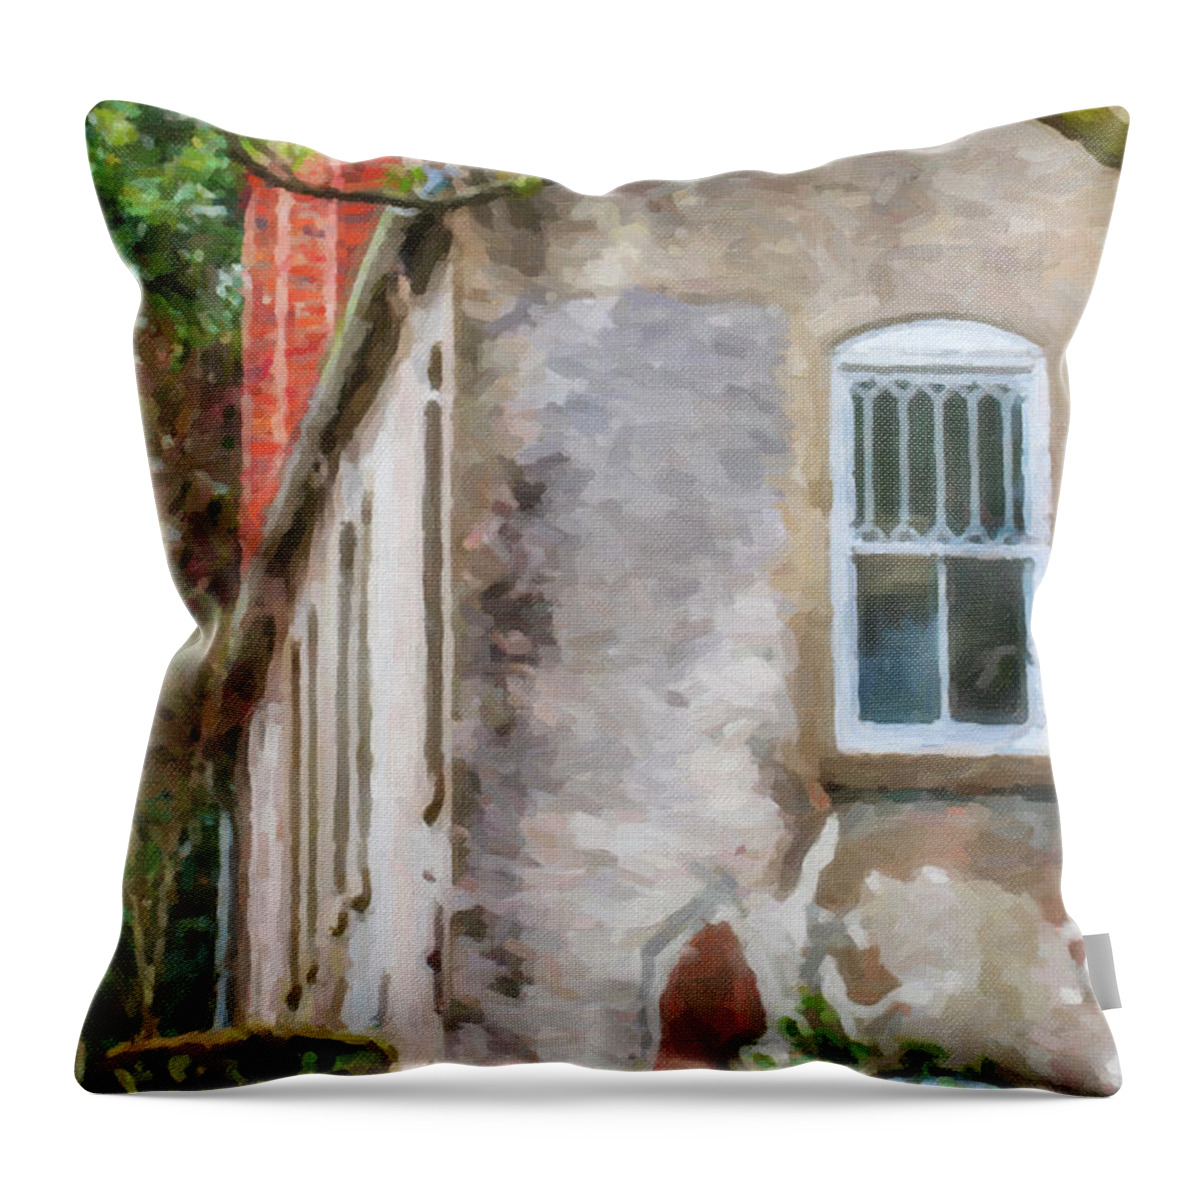 Stone Cottage Throw Pillow featuring the digital art Stone Cottage by Dale Powell